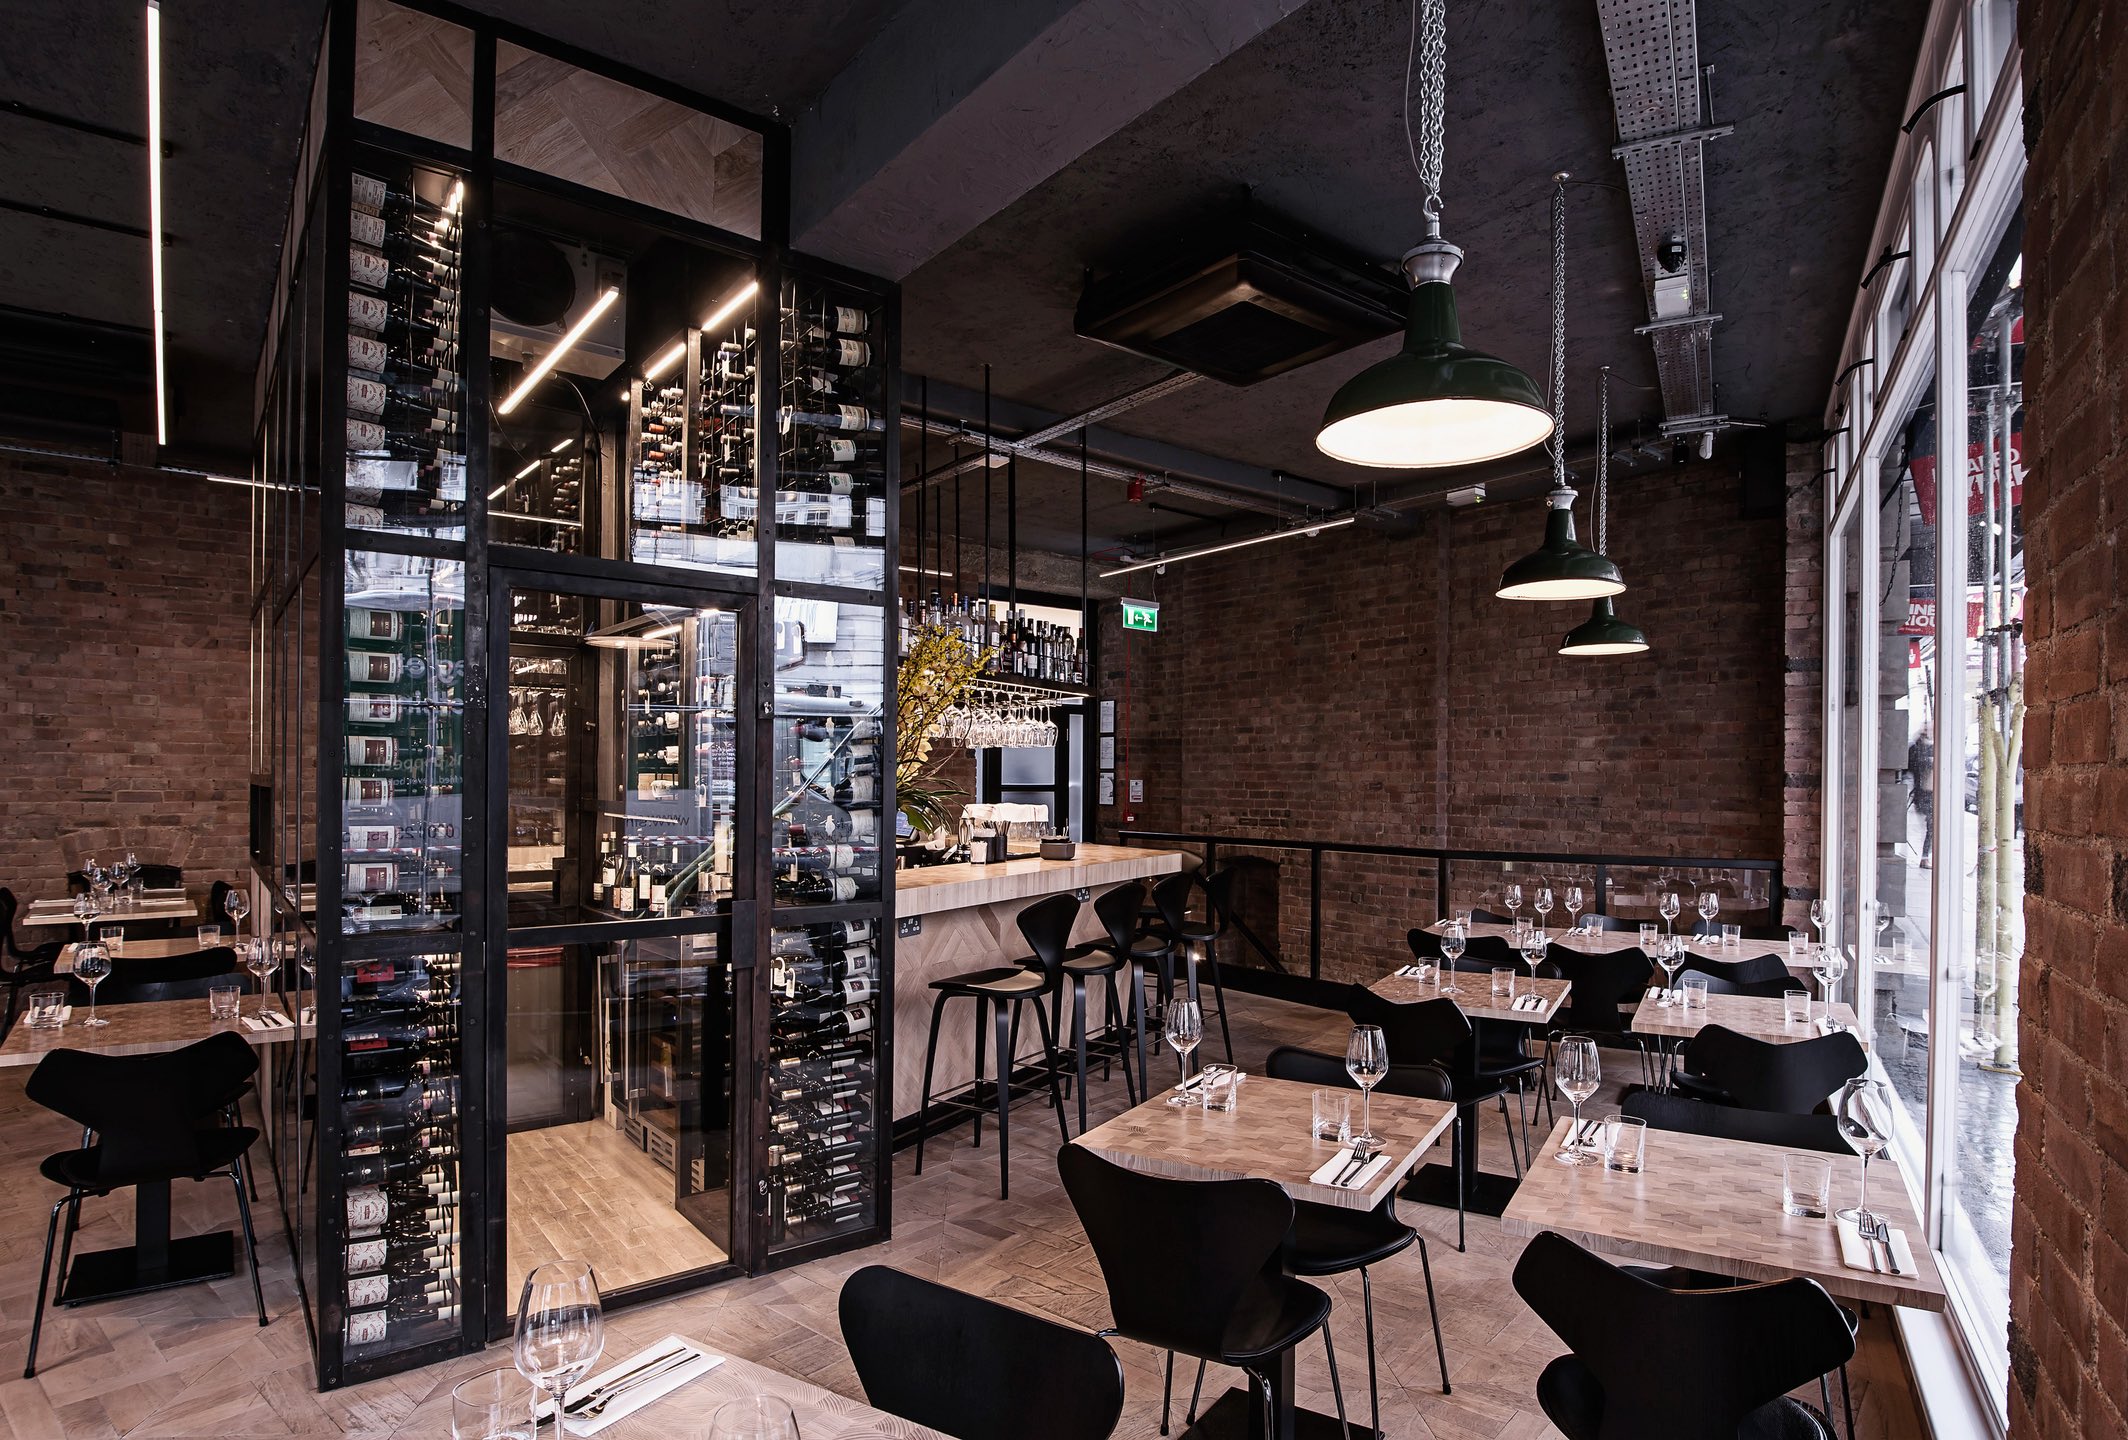 Four to Eight Restaurant, Central London - Designed by ATELIERwest Ltd. 2